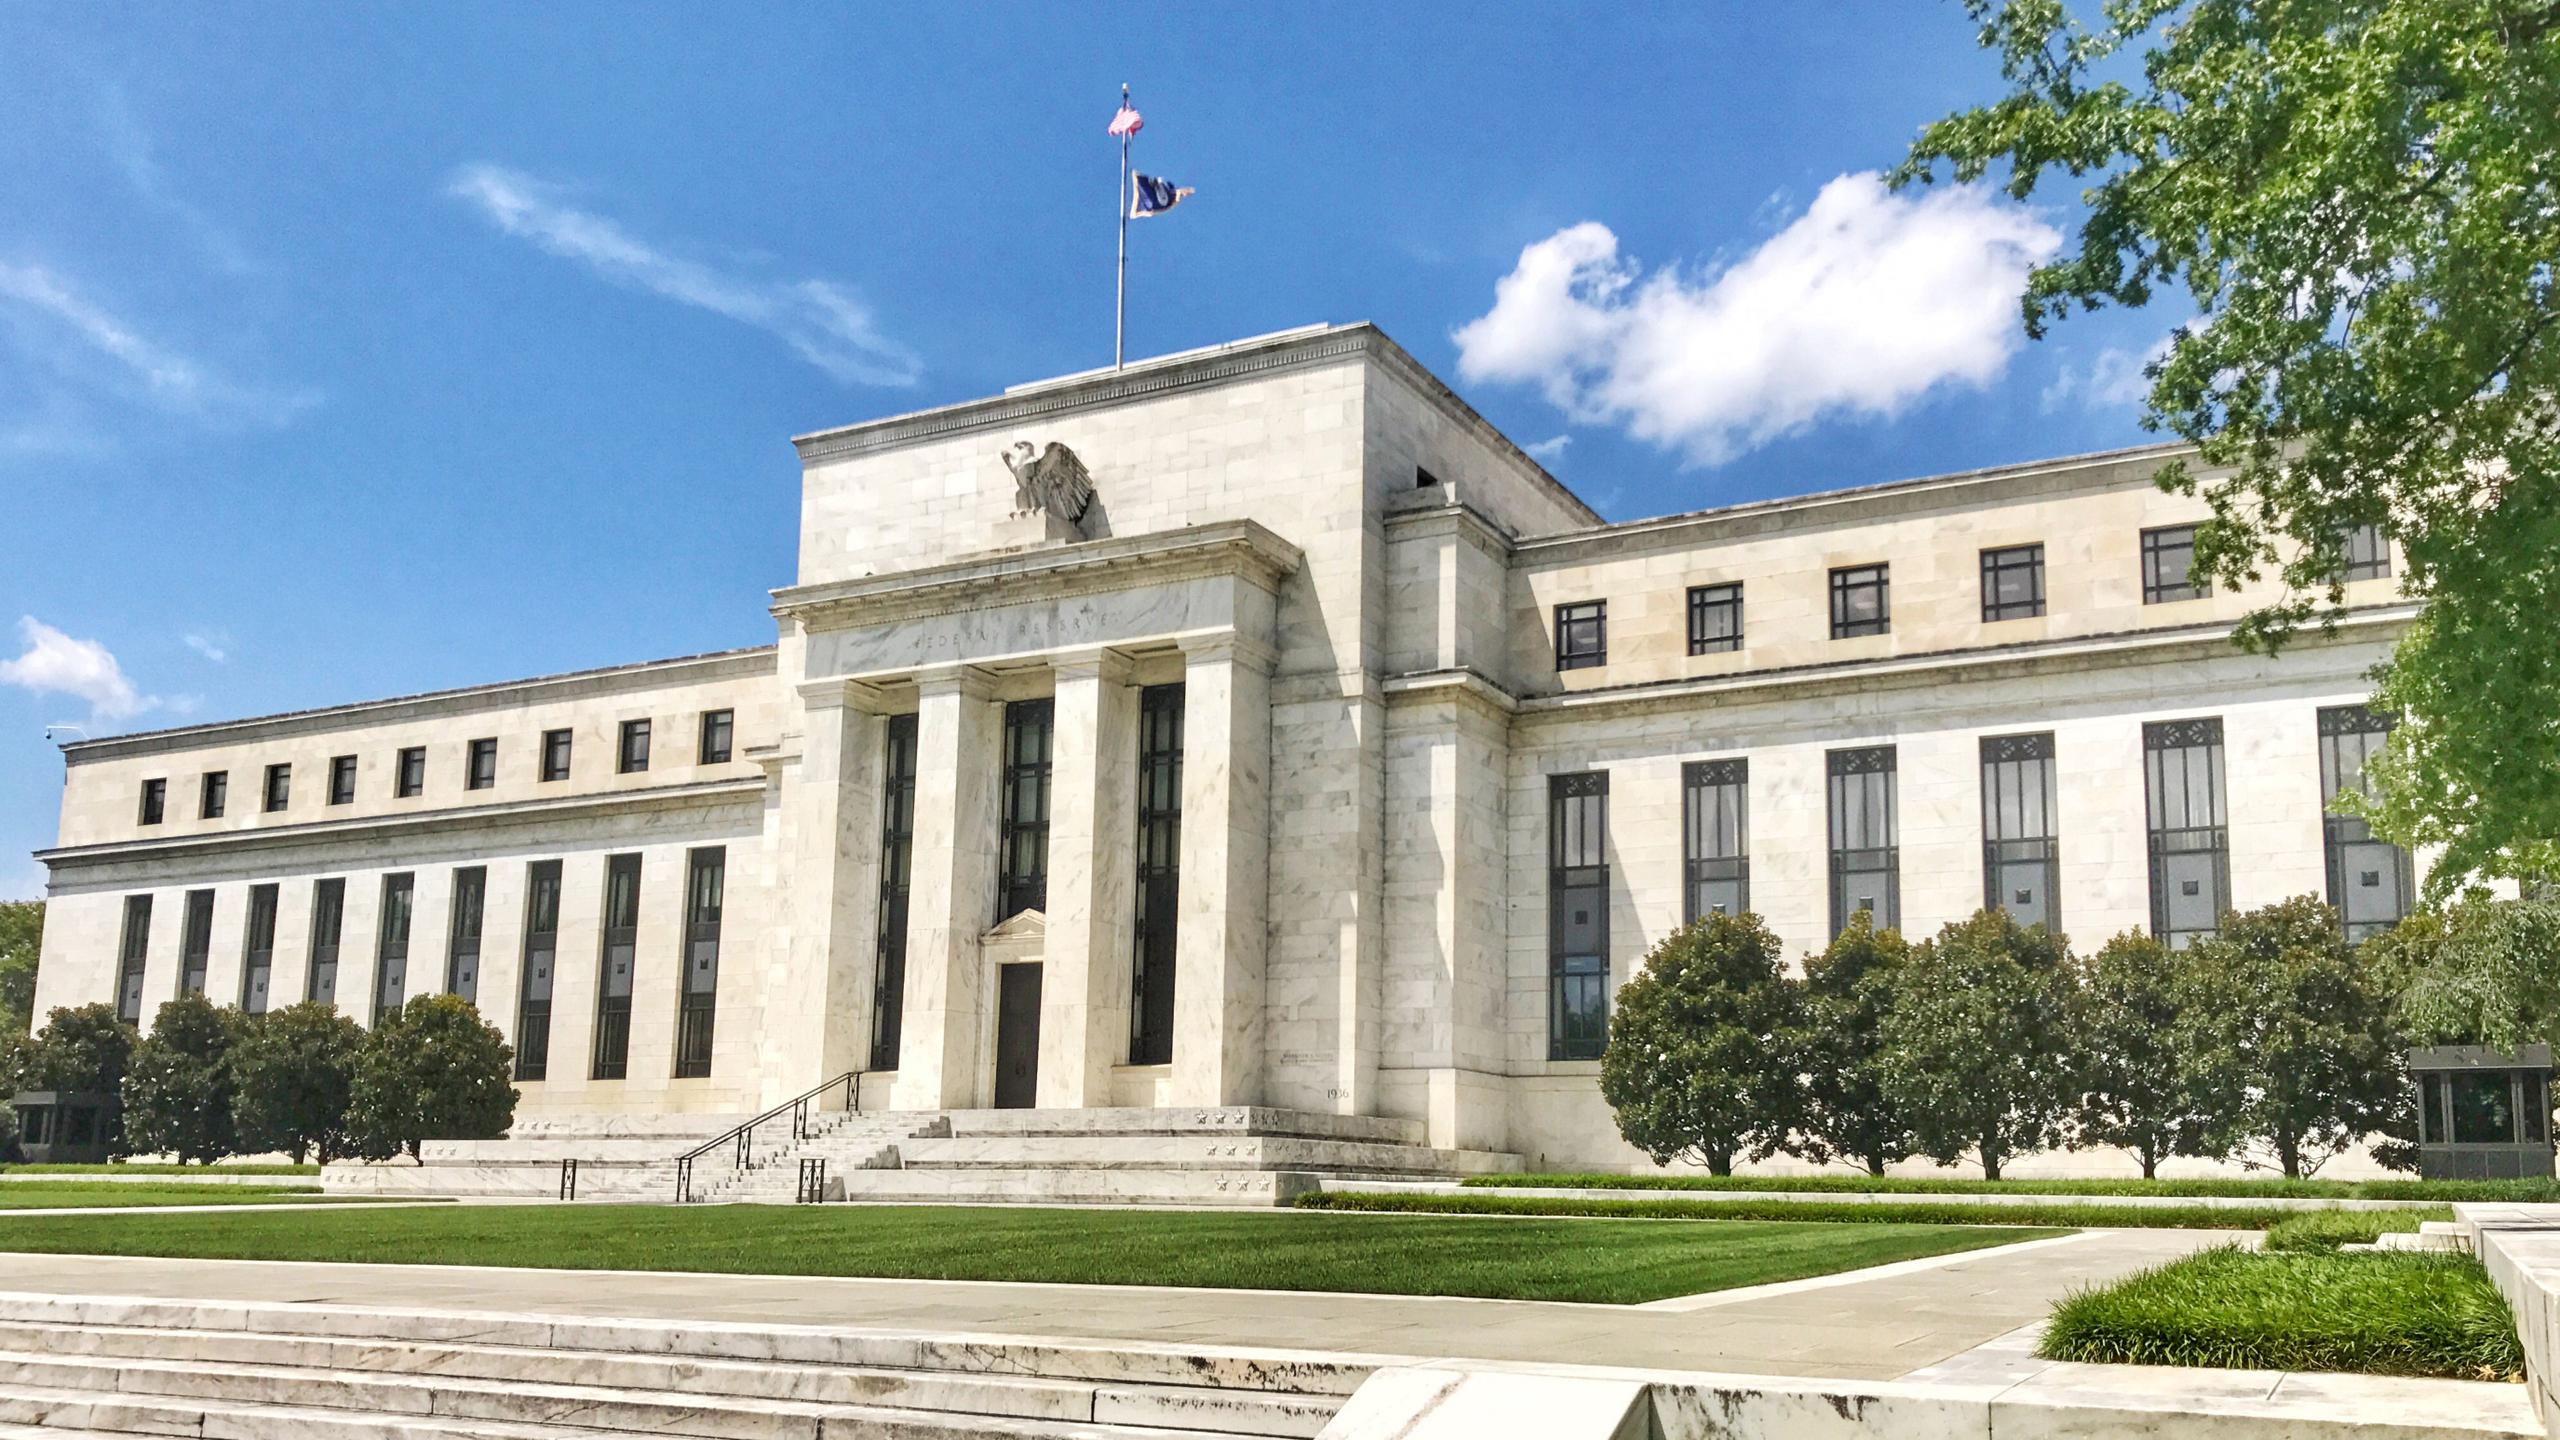 According to the Federal Reserve, 722 banks reported unrealized losses of more than 50% of their capital